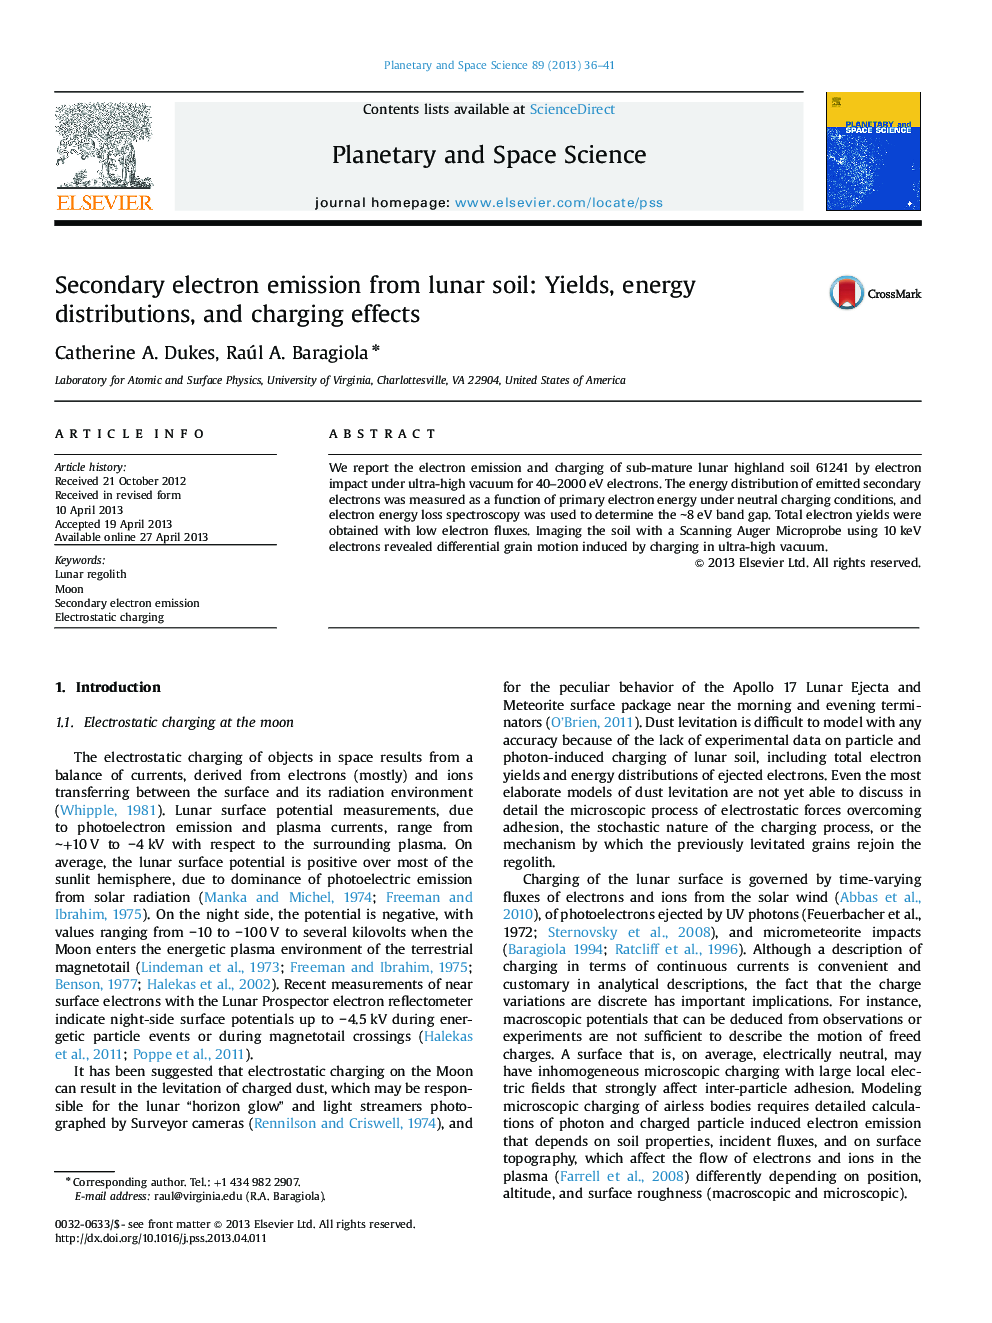 Secondary electron emission from lunar soil: Yields, energy distributions, and charging effects